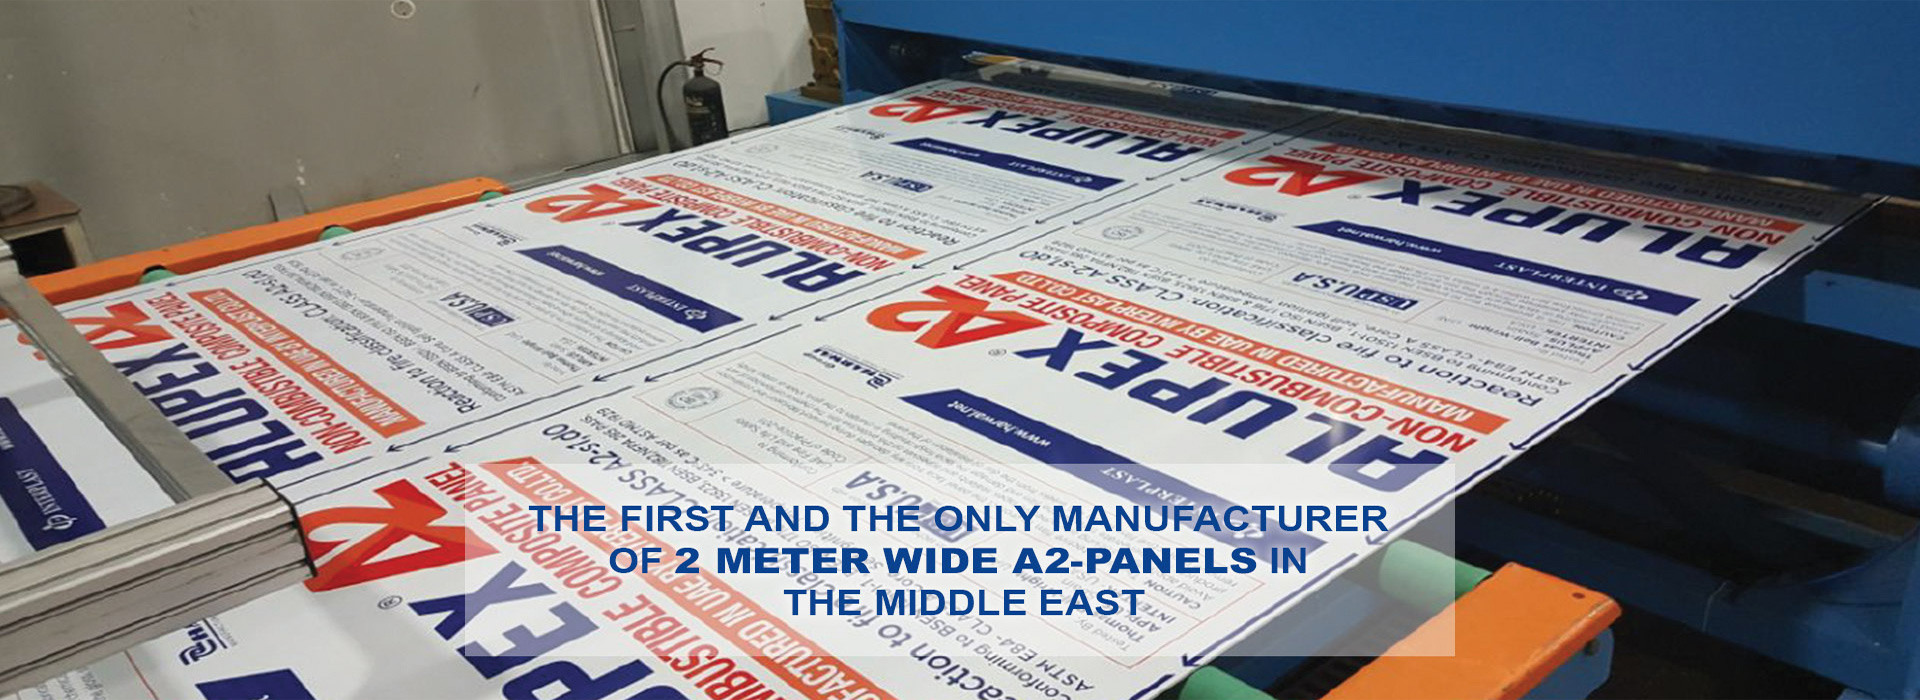 THE FIRST AND ONLY MANUFACTURER OF 2 METER WIDE A2 - PANELS IN THE MIDDLE EAST